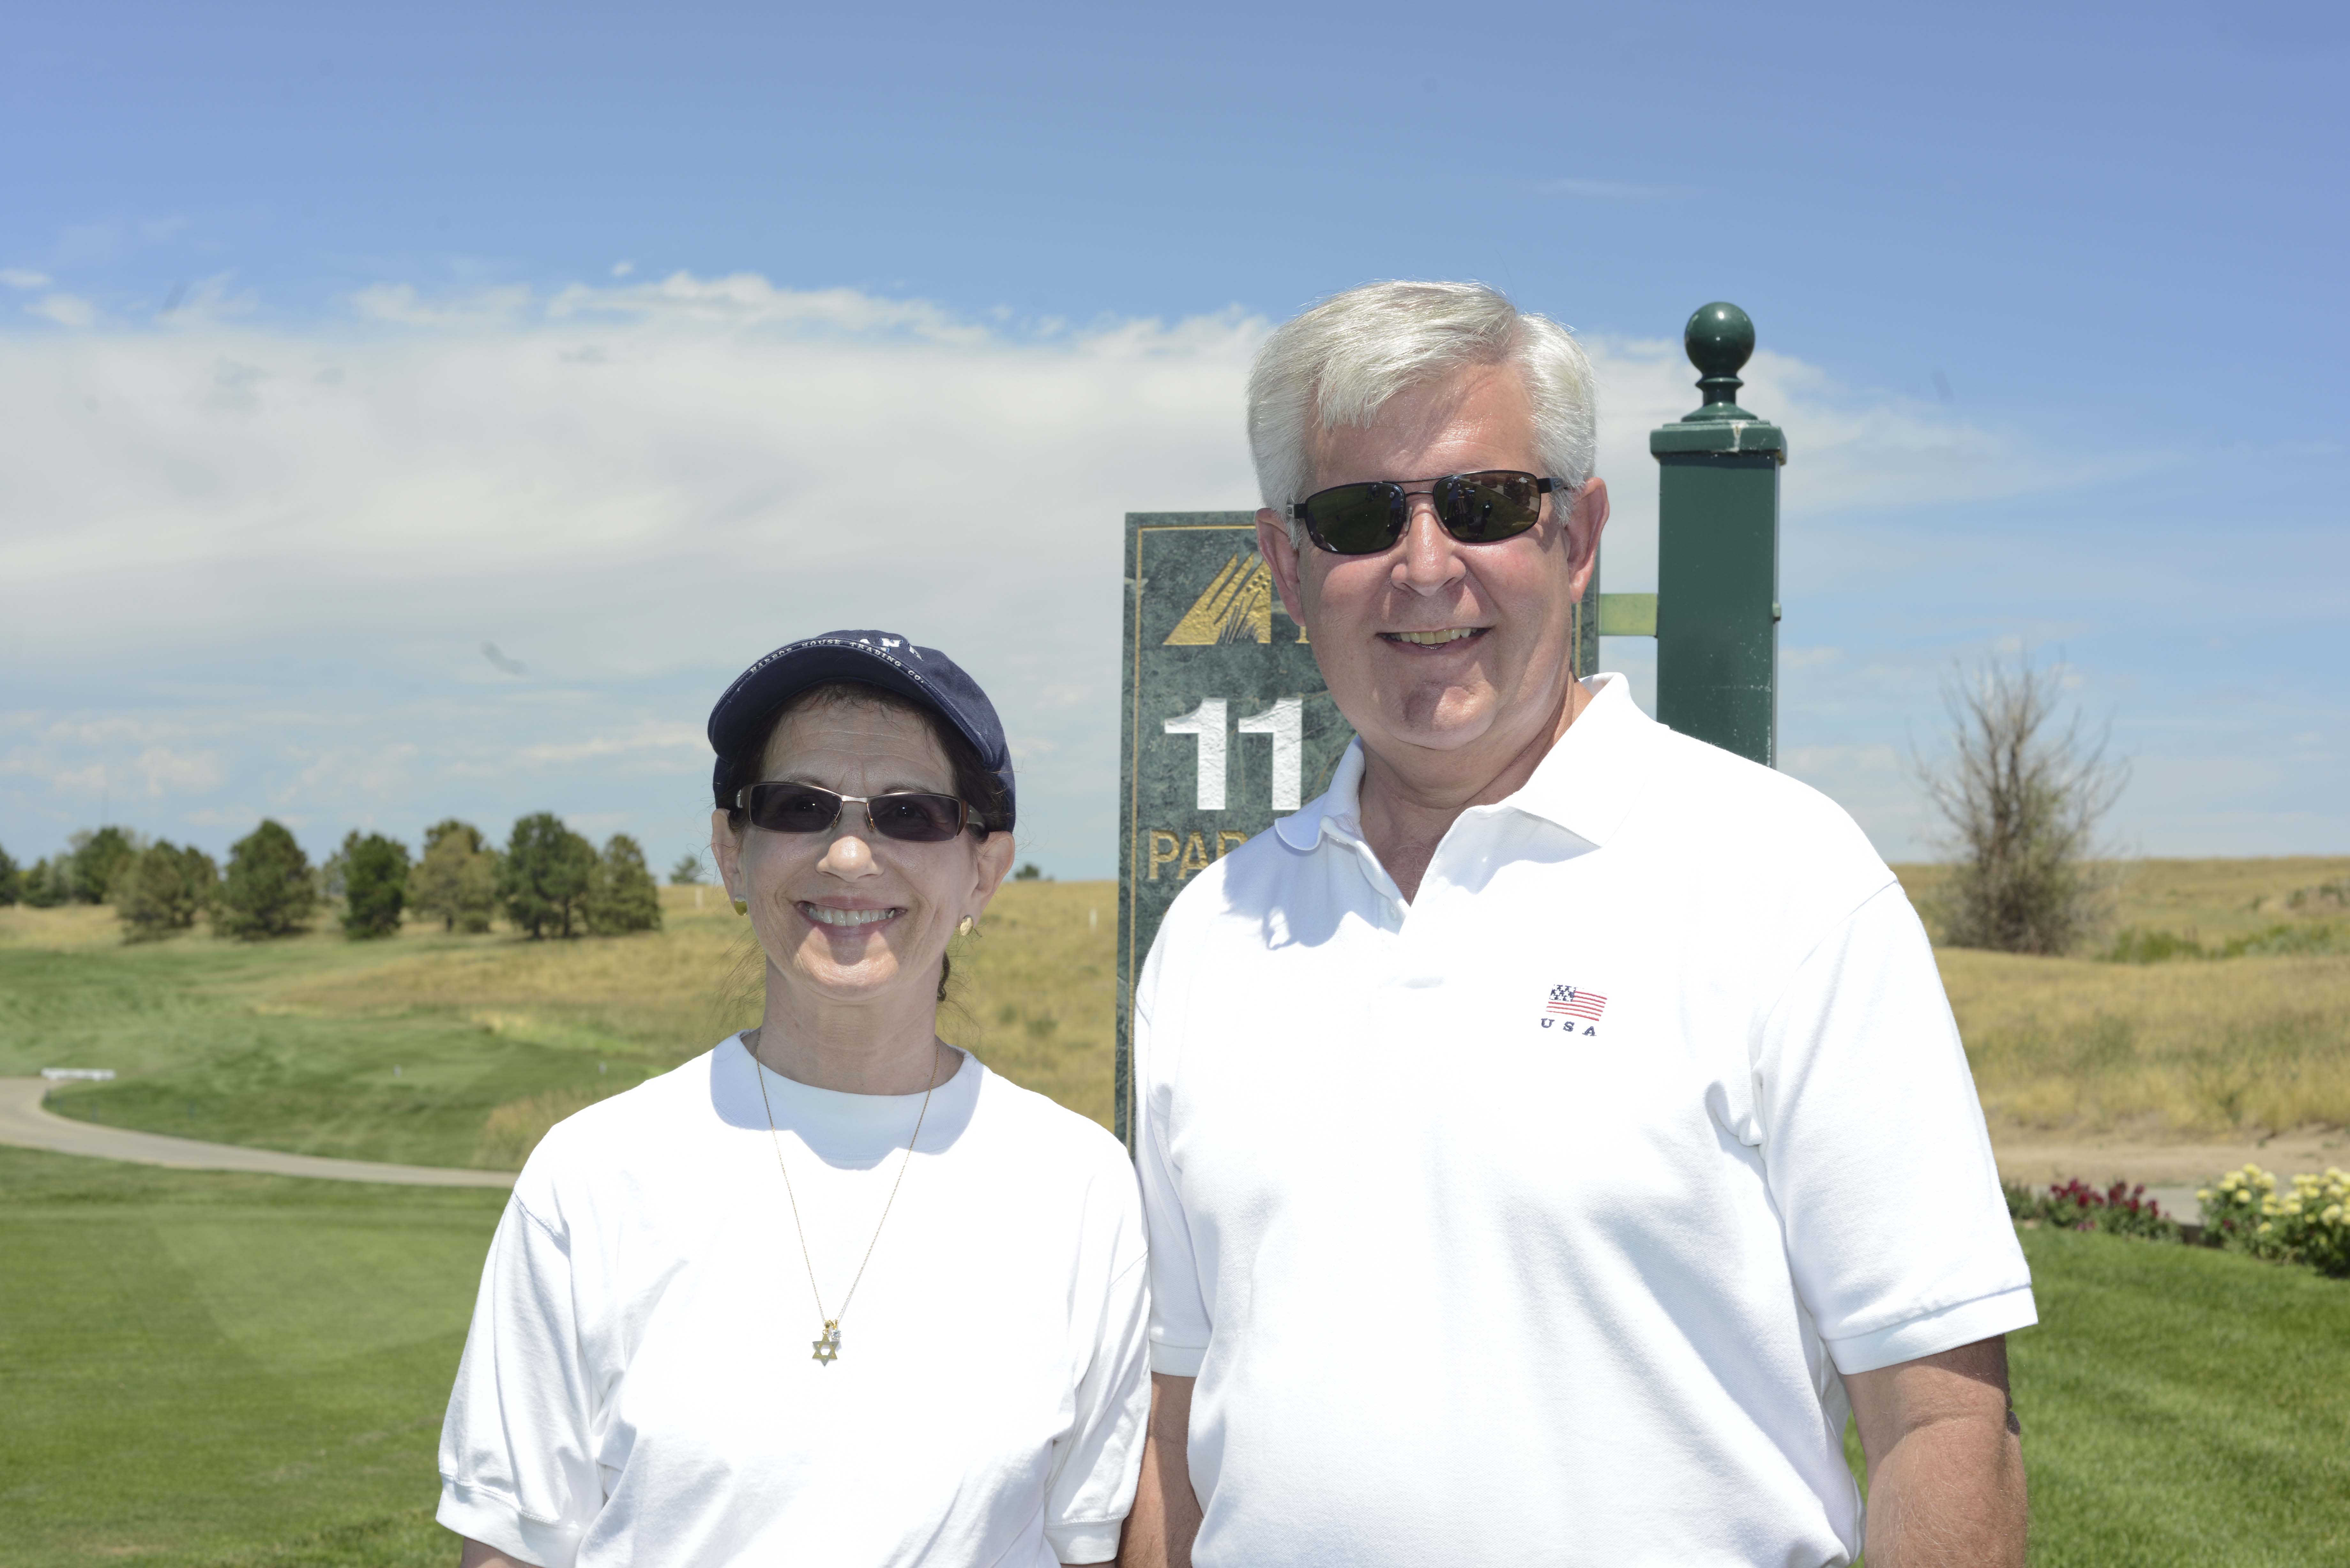 Volunteers at hole 11 Bob Leland and his wife Ruth